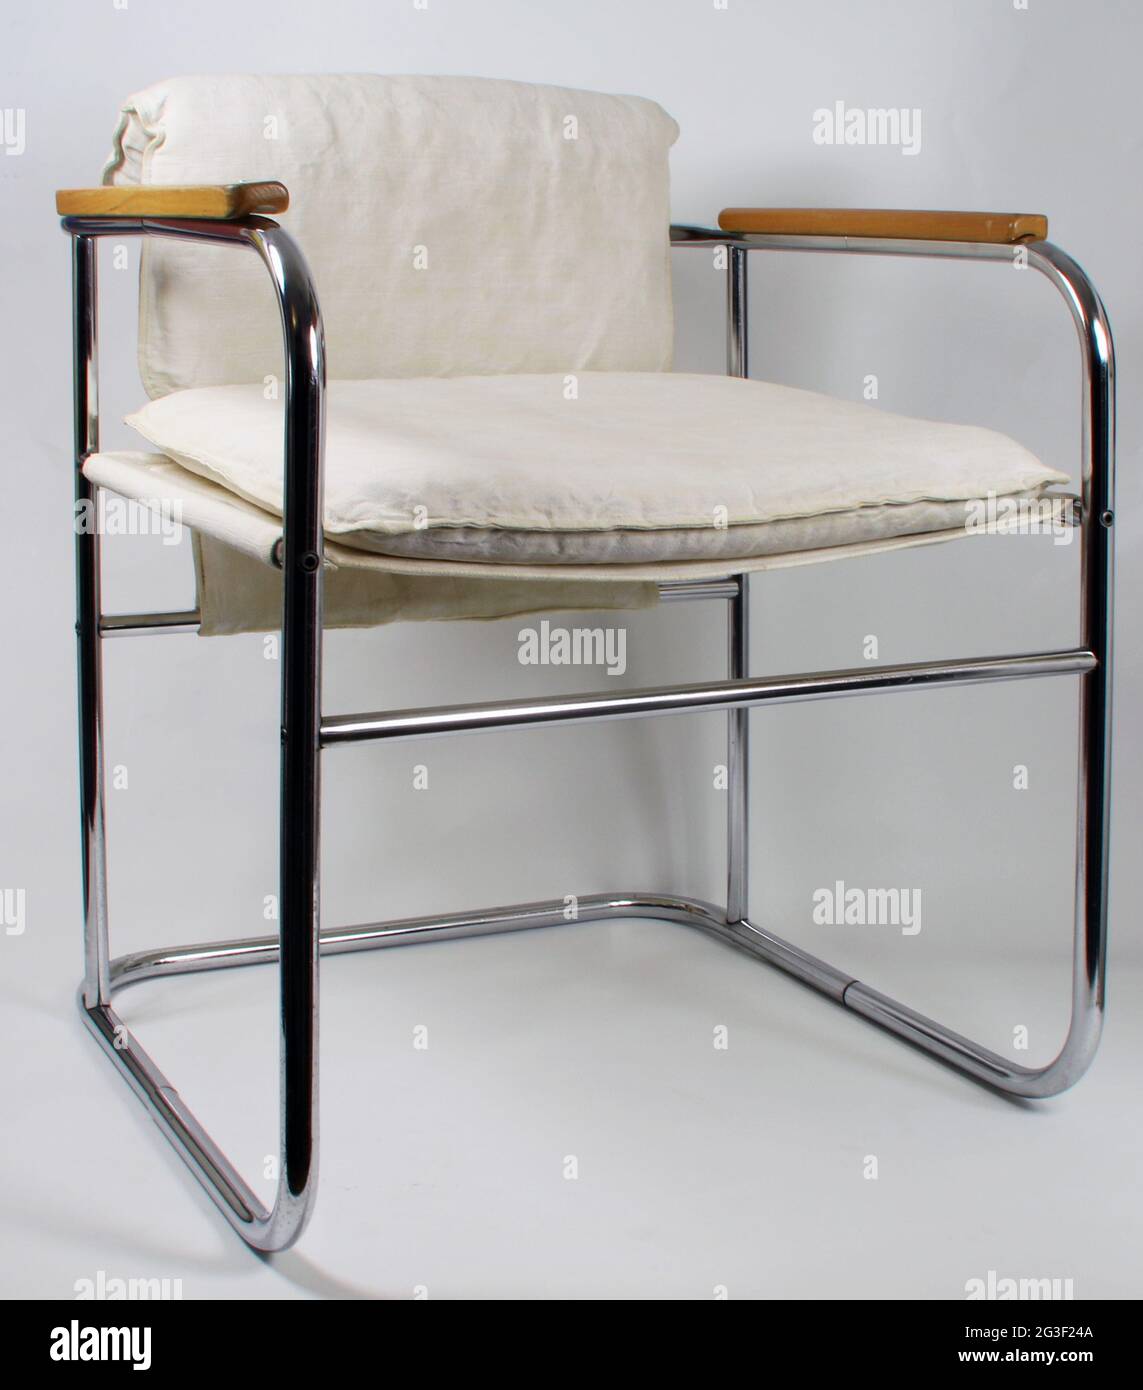 furnishings, tubular steel chair 'U', design: Lutz Rudolph, ADDITIONAL-RIGHTS-CLEARANCE-INFO-NOT-AVAILABLE Stock Photo